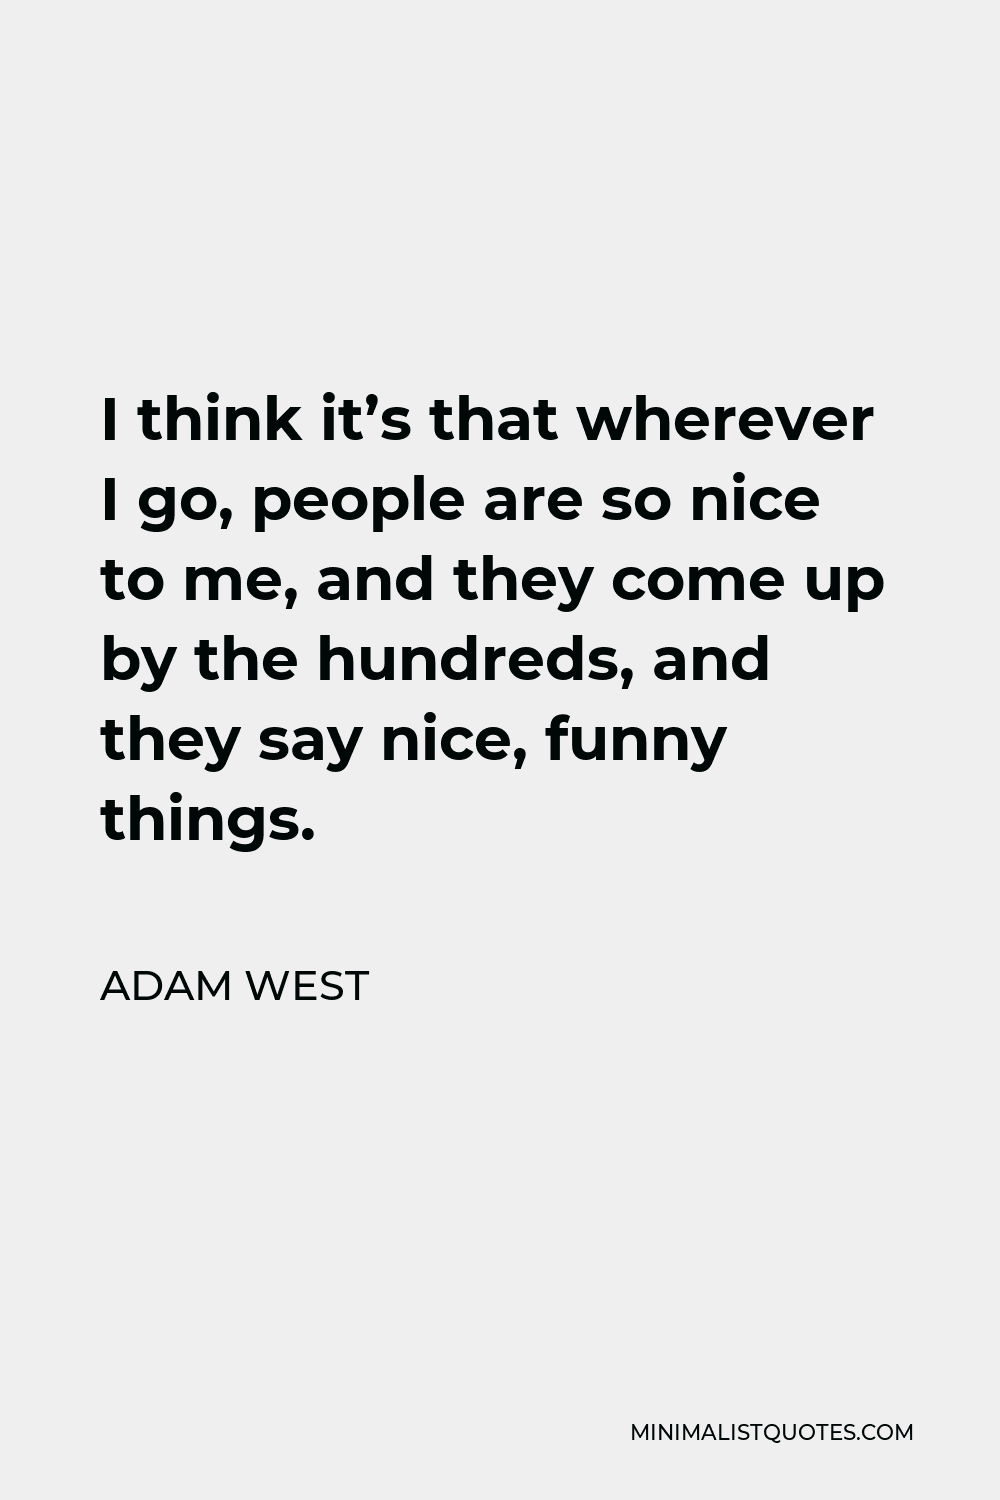 Adam West Quote - I think it’s that wherever I go, people are so nice to me, and they come up by the hundreds, and they say nice, funny things.